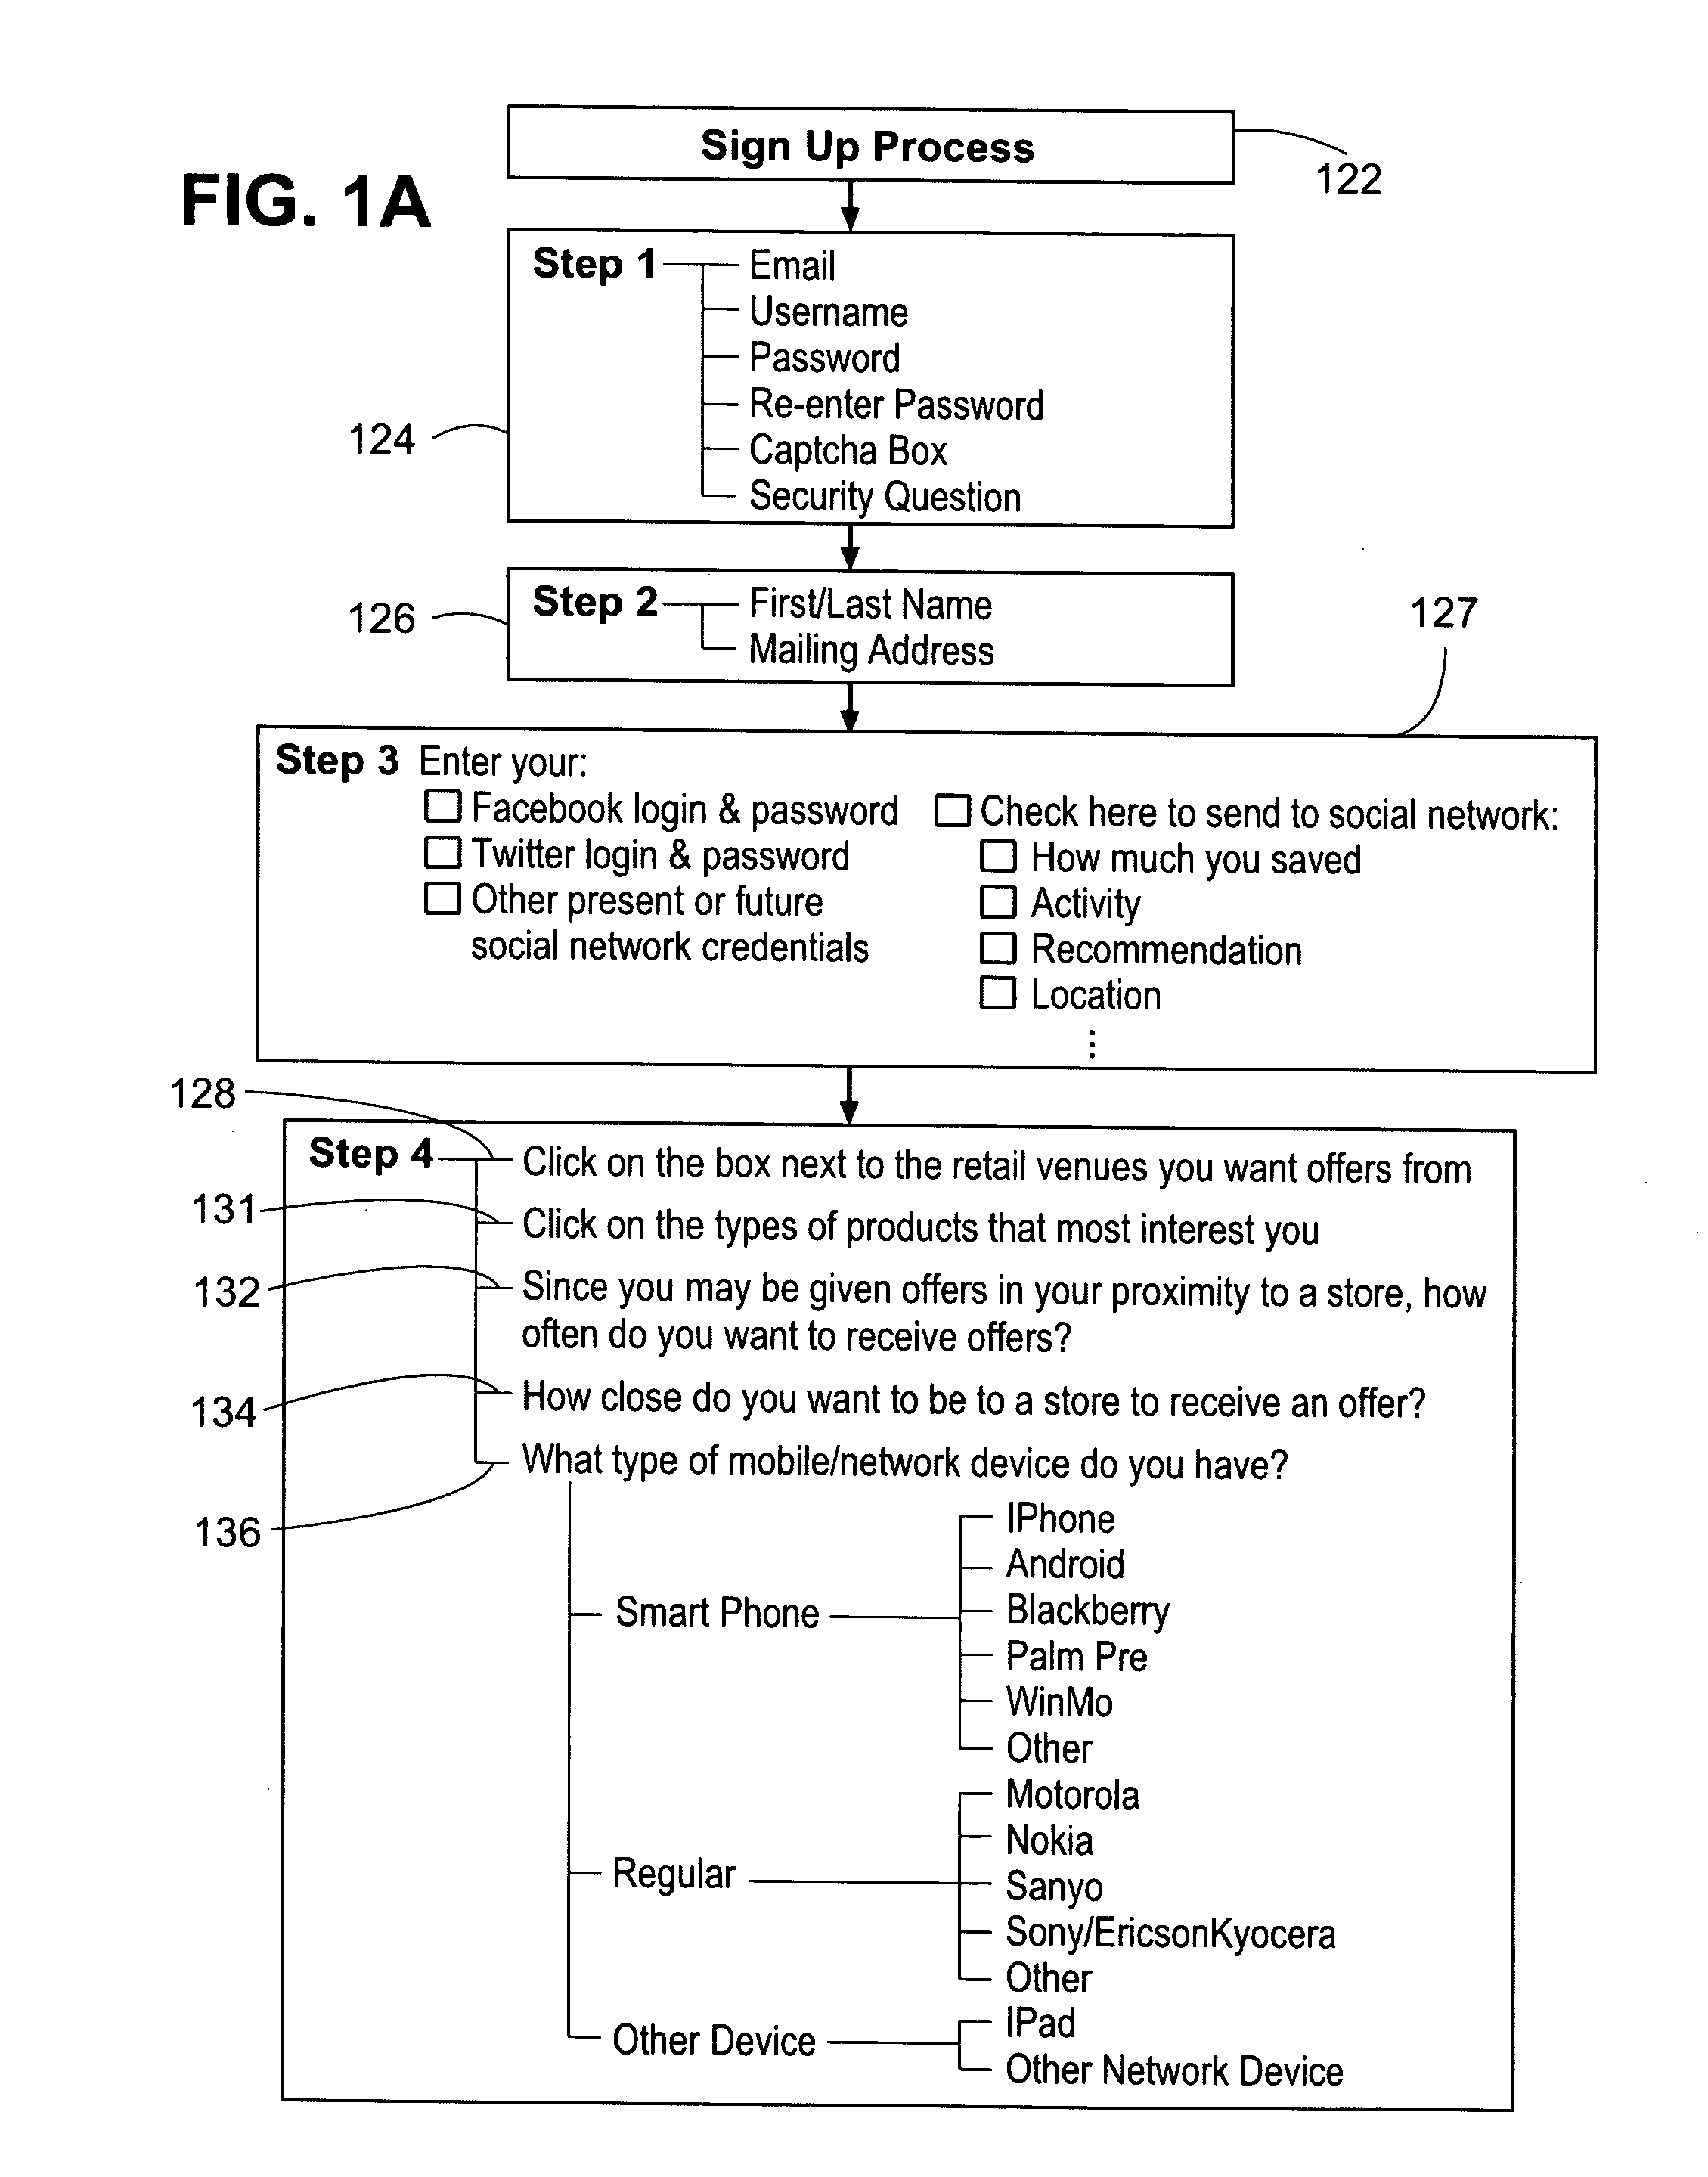 Electronic coupon system and data mining and use thereof in relation thereto and for use interactive participation of individuals and groups within the system